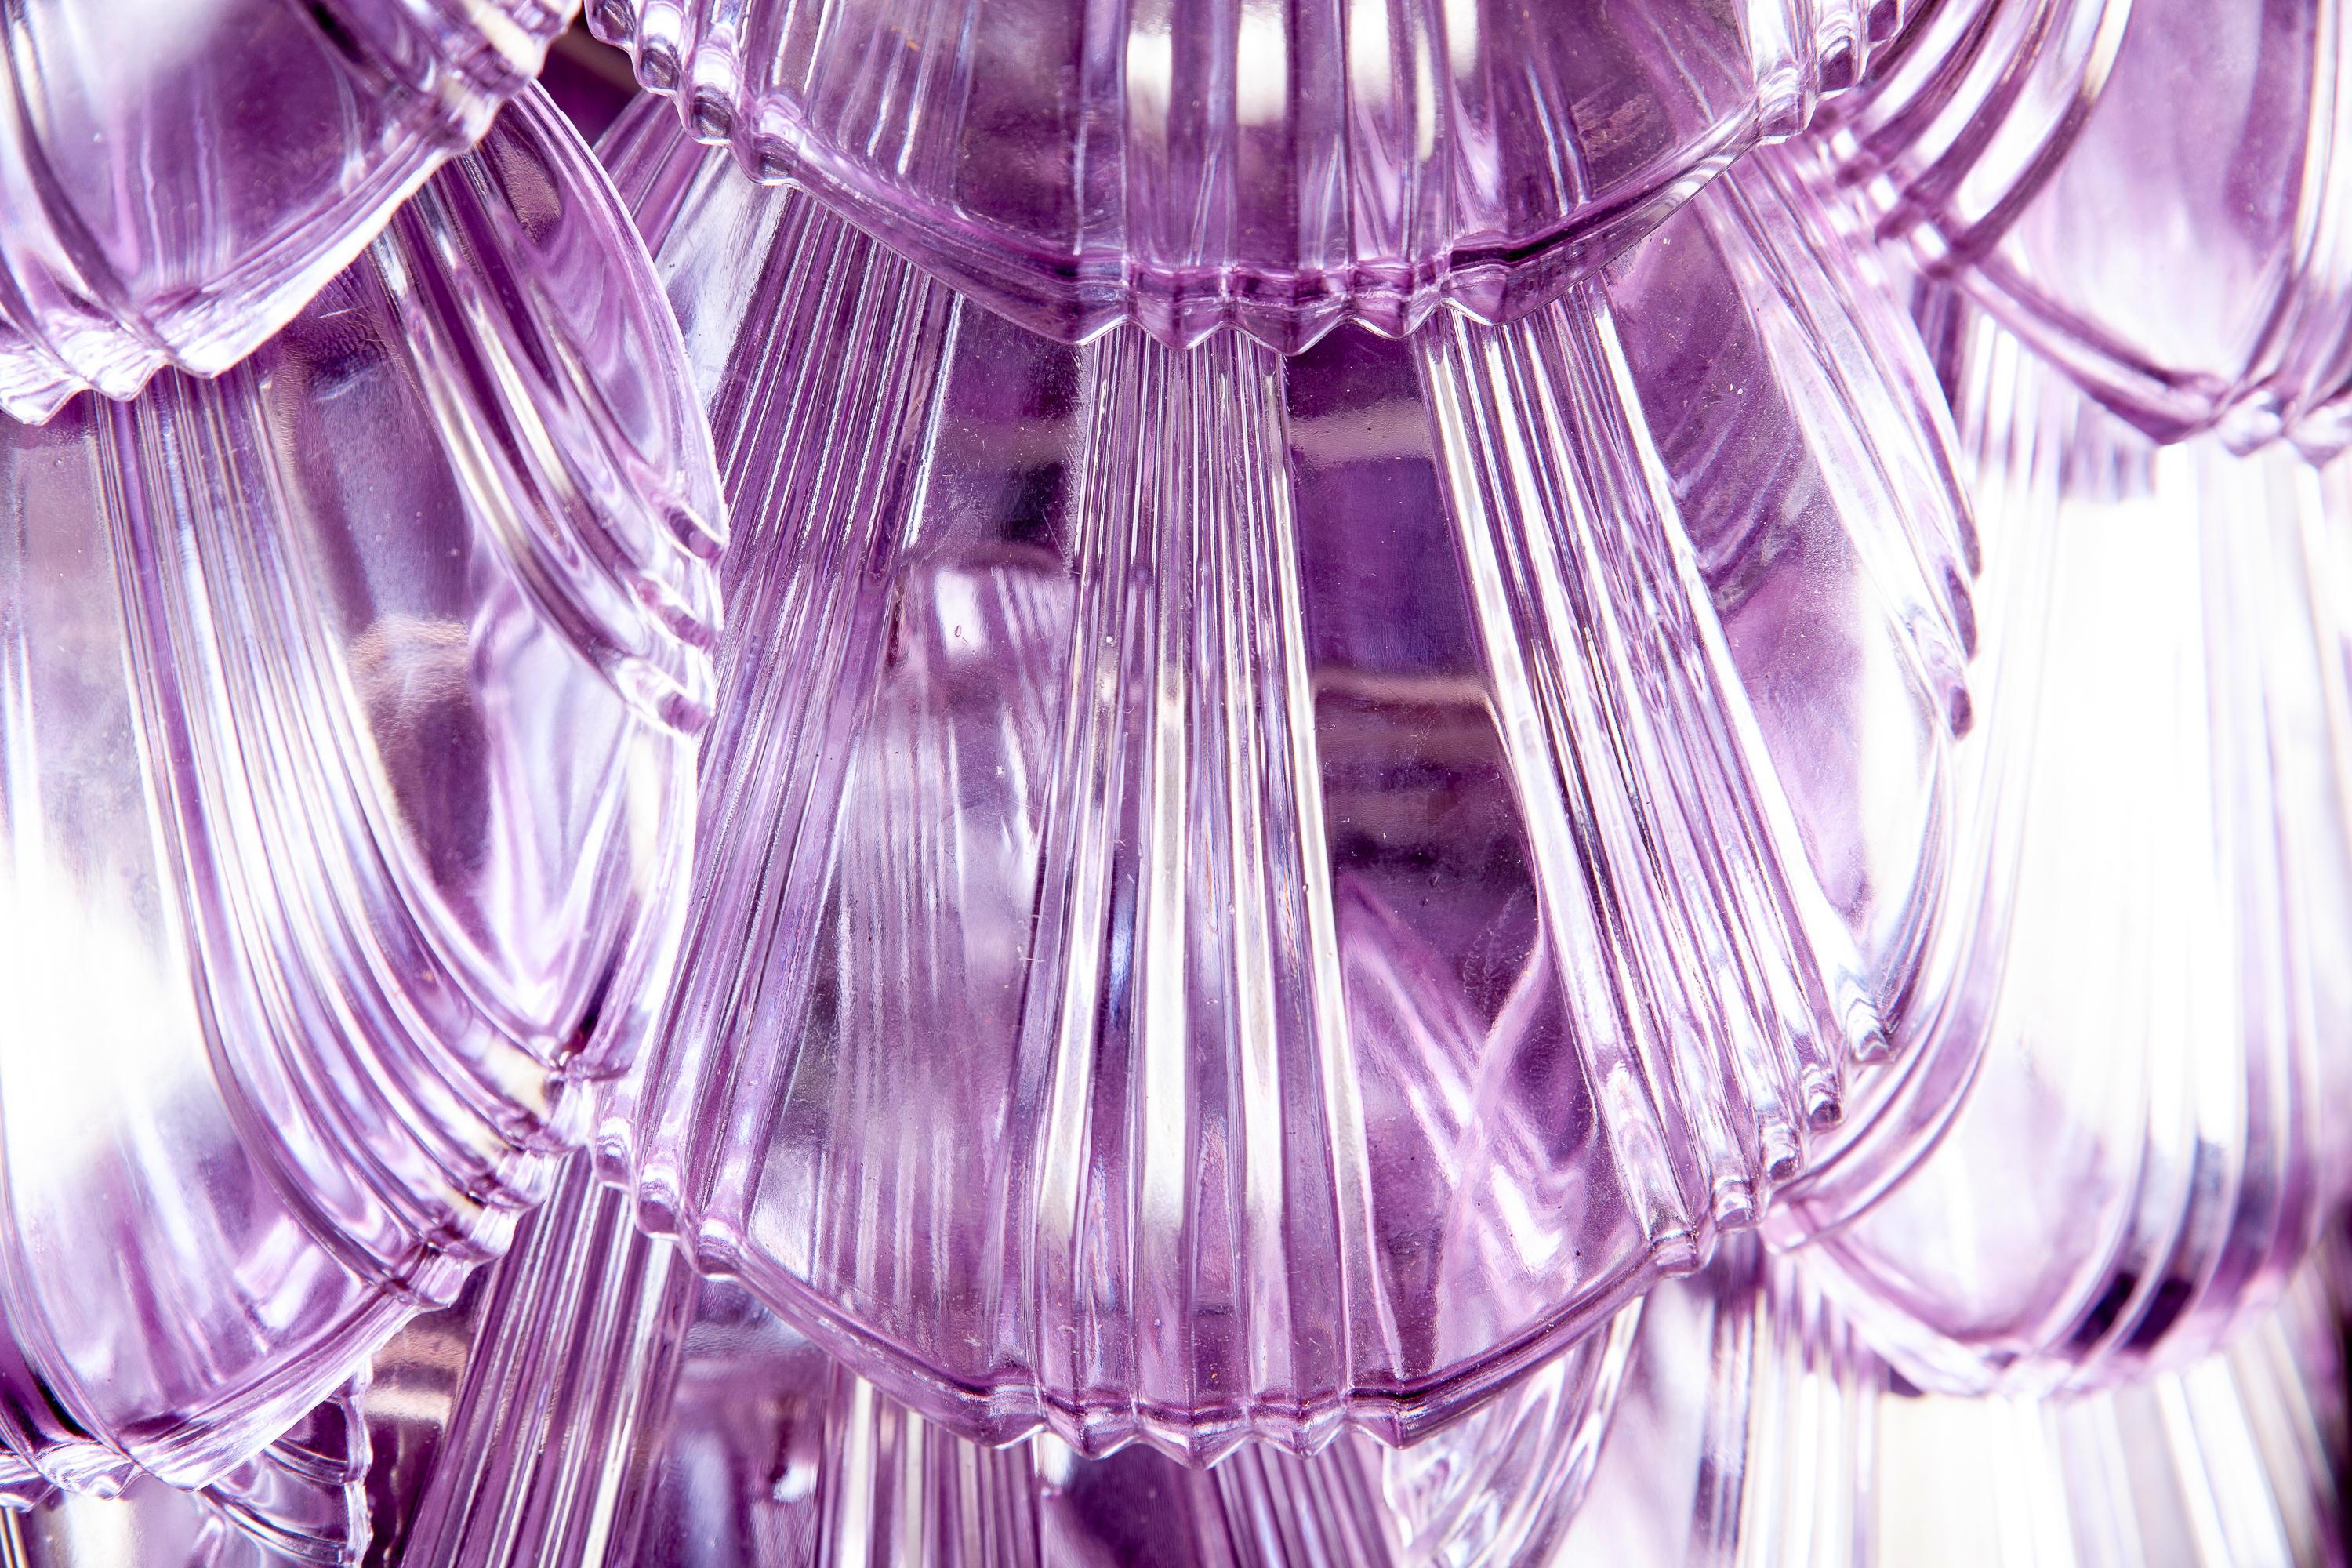 Pink Shell Murano Glass Huge Chandelier, 1980 For Sale 8